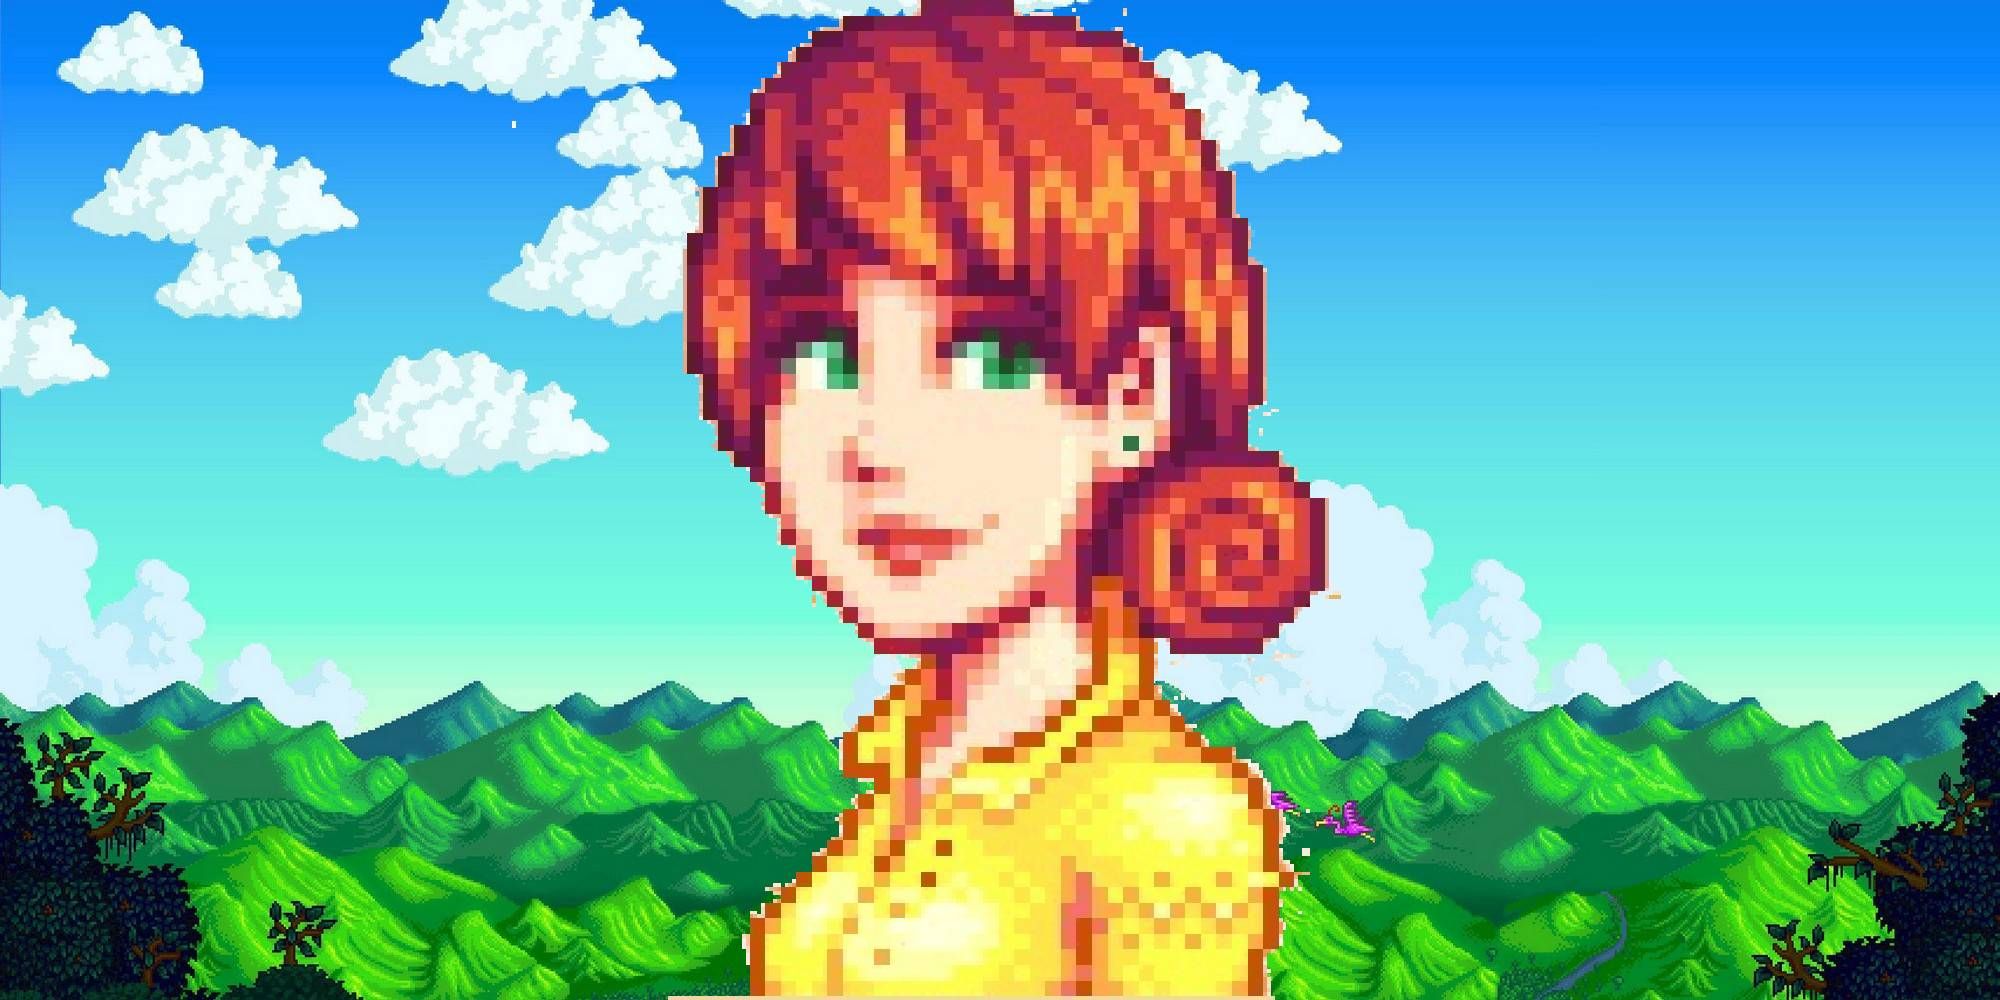 penny on the stardew valley title background marriage